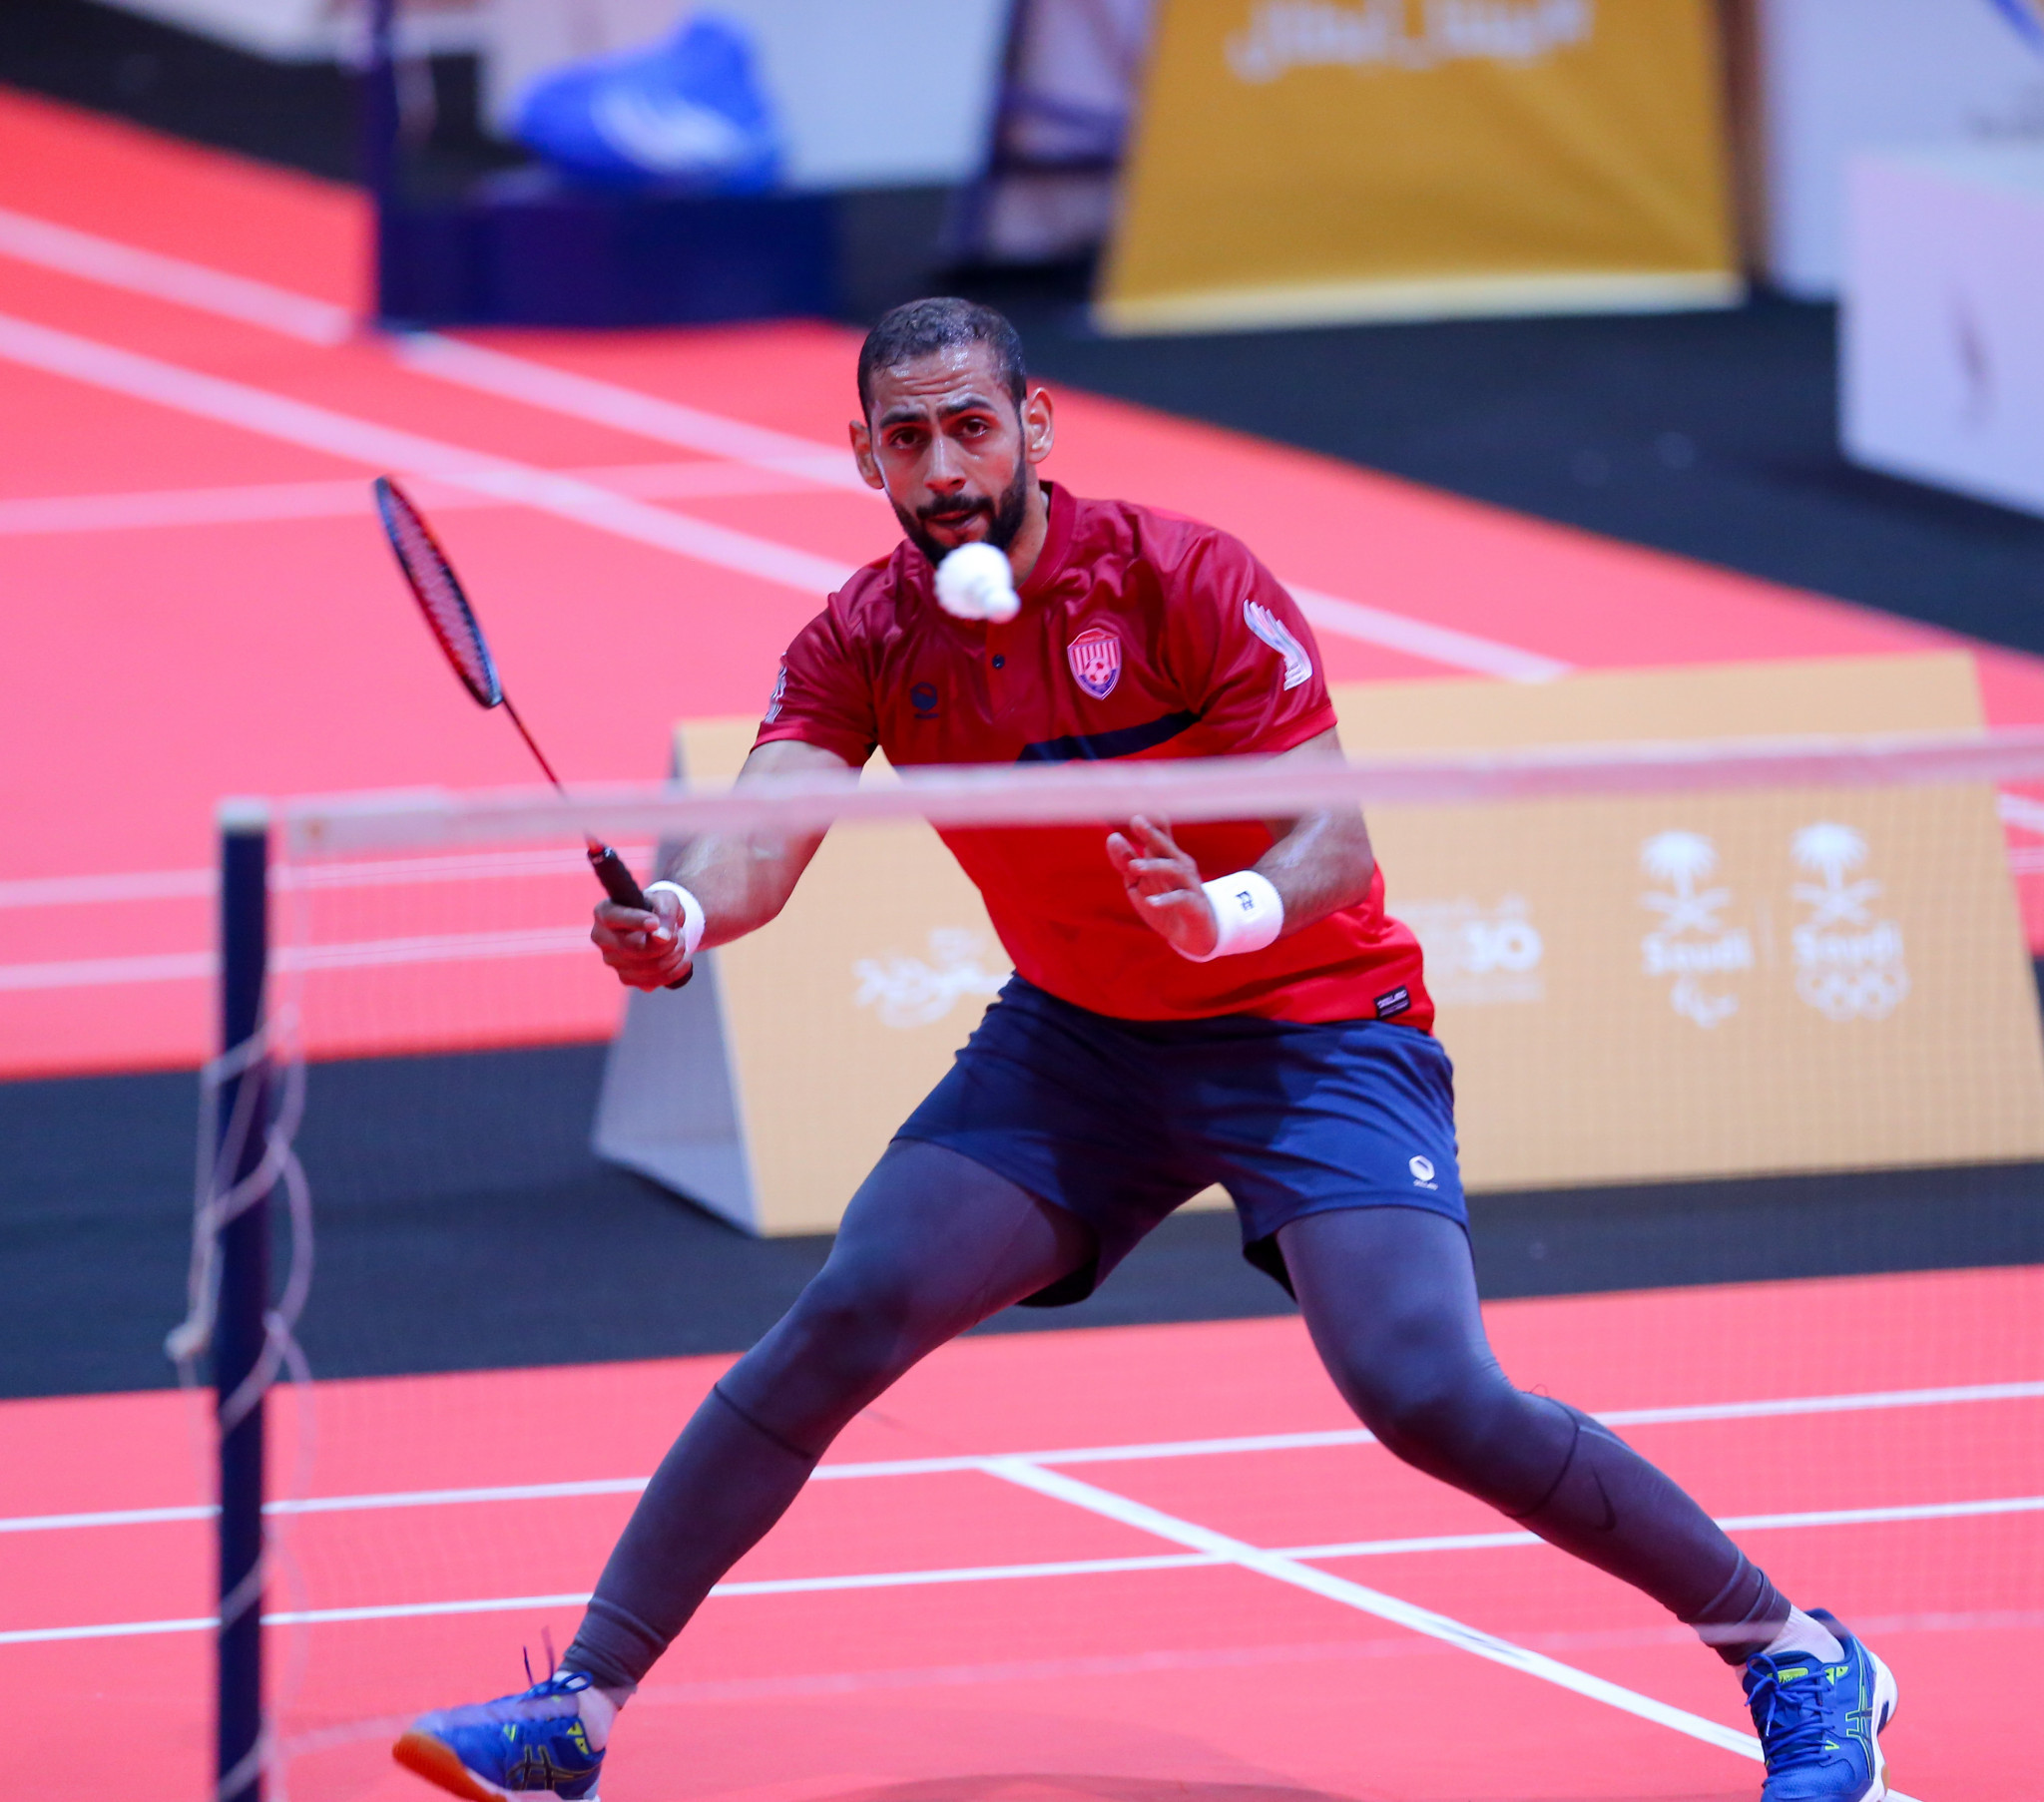 Badminton group matches were staged at the SAOC Complex facilities ©Saudi Games